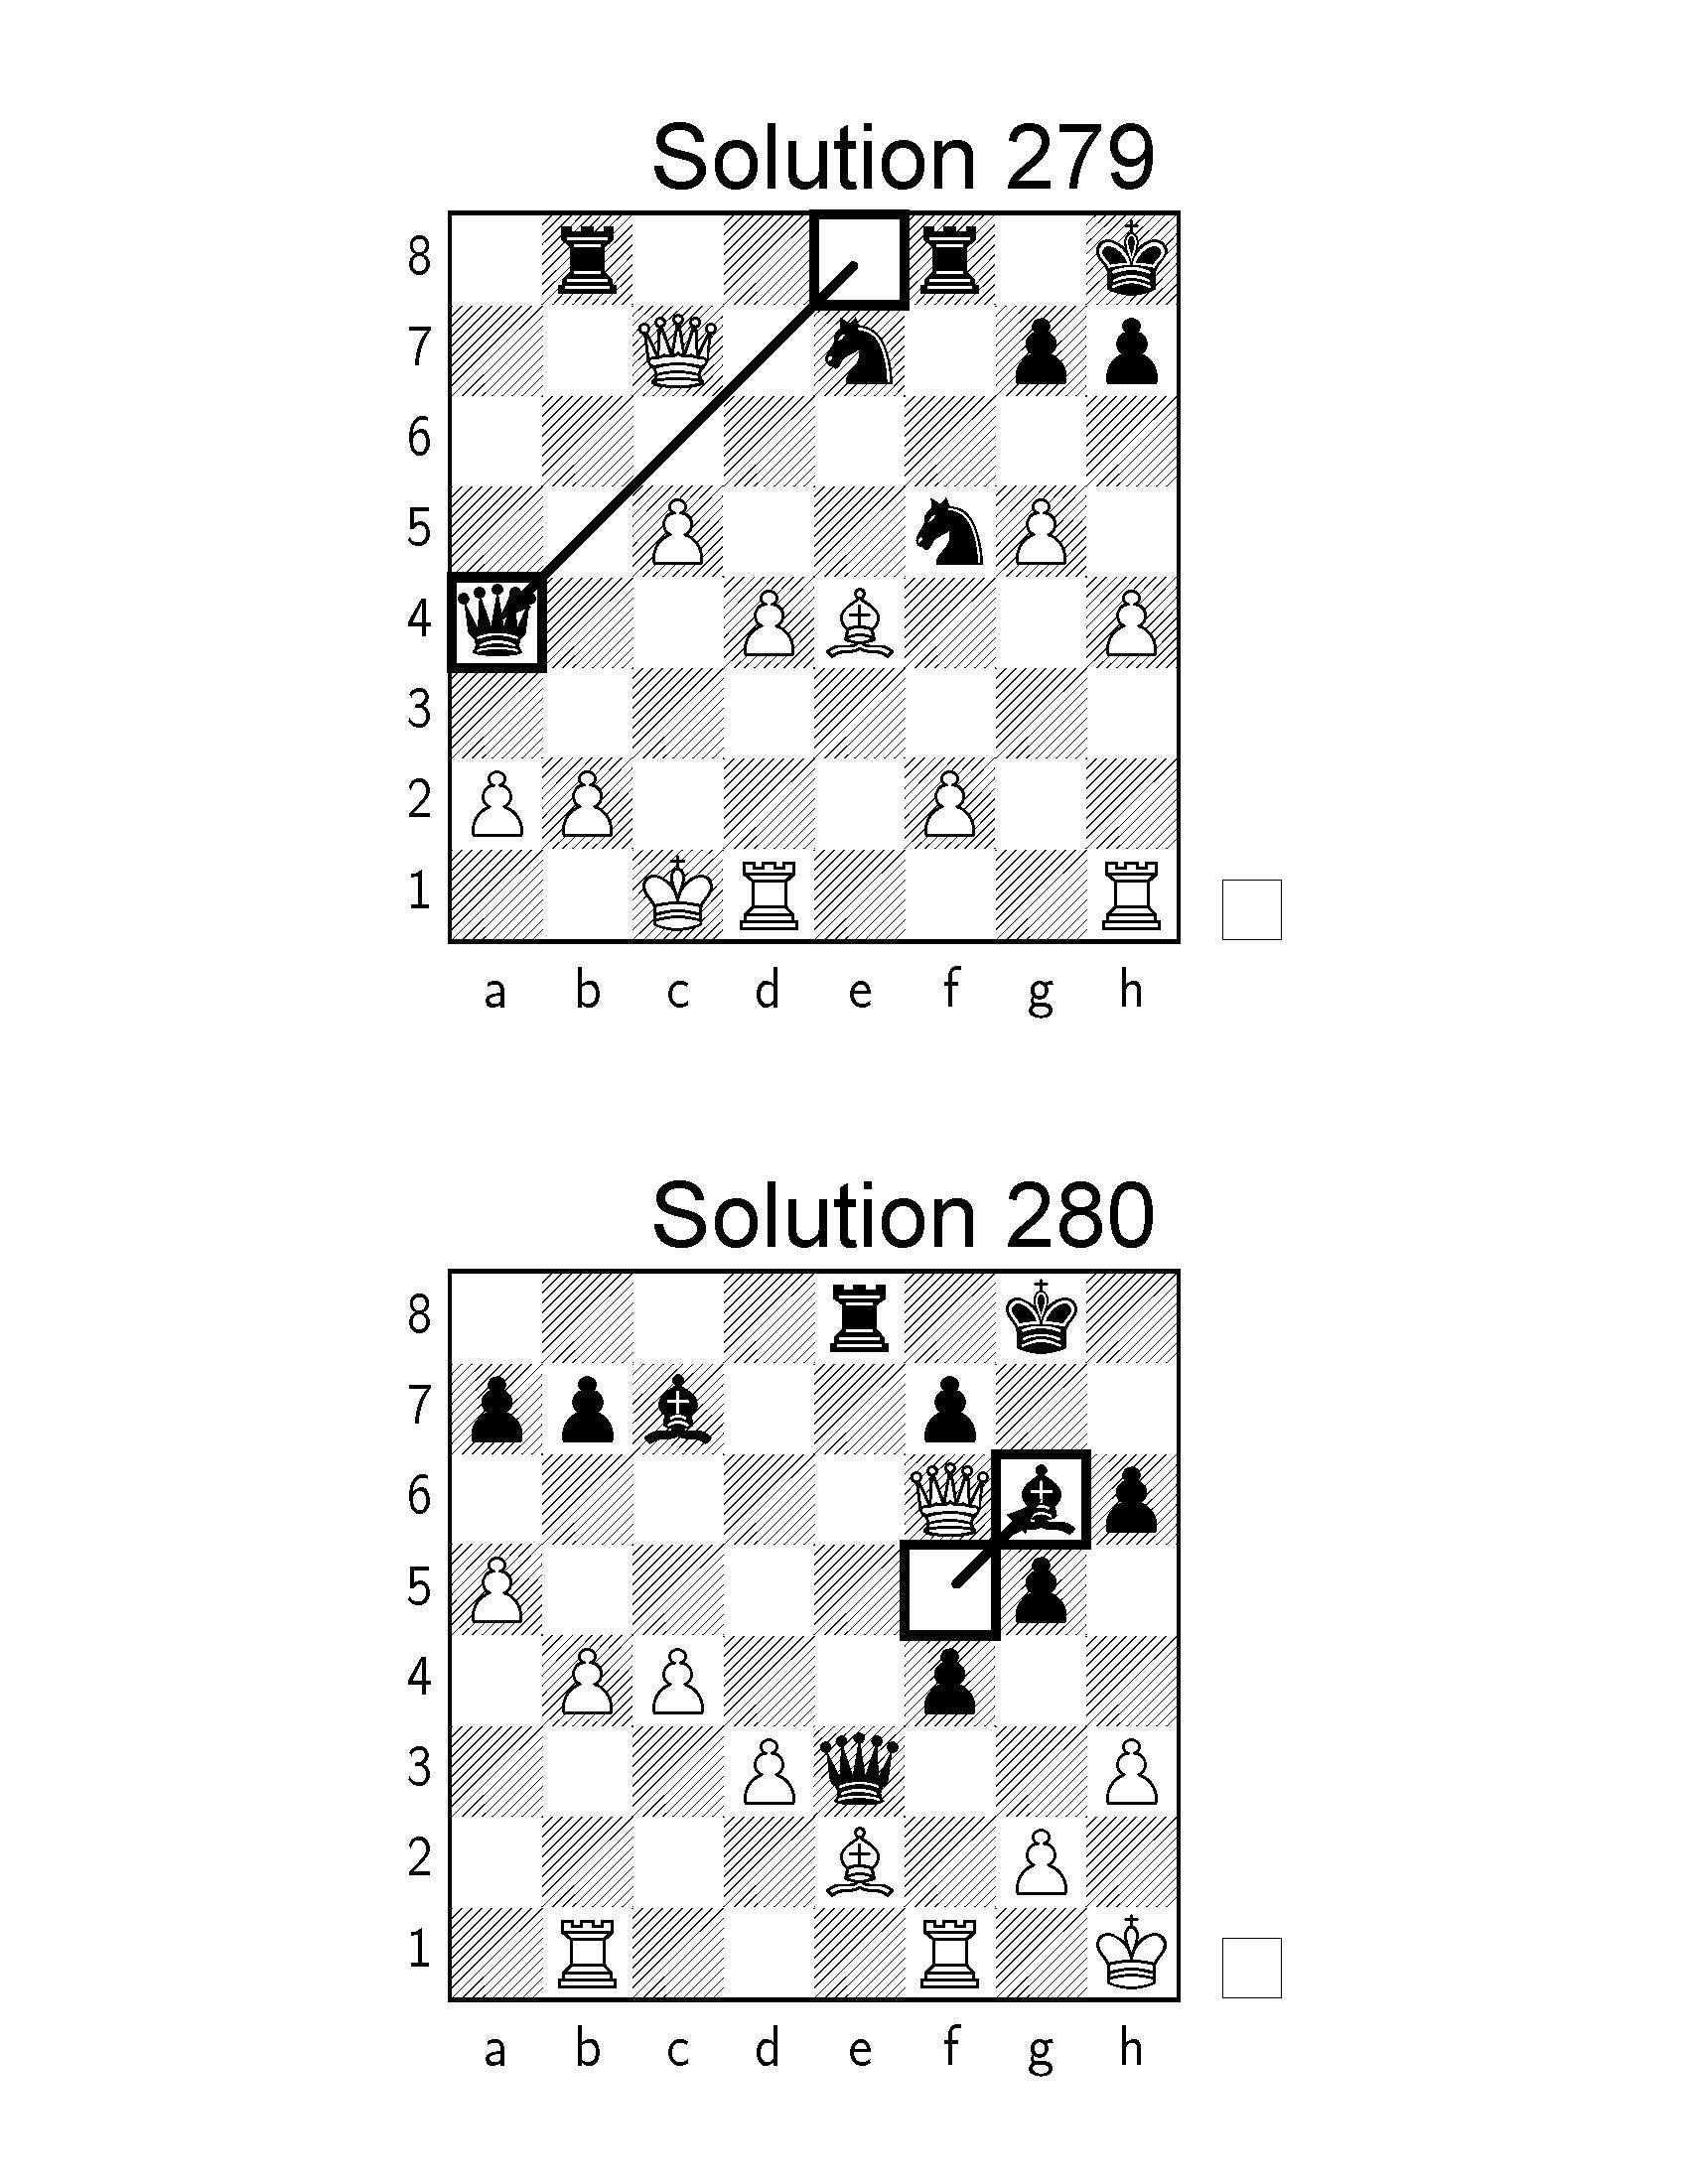 200 Defensive Chess Puzzles for Beginners: Rating 700-1300